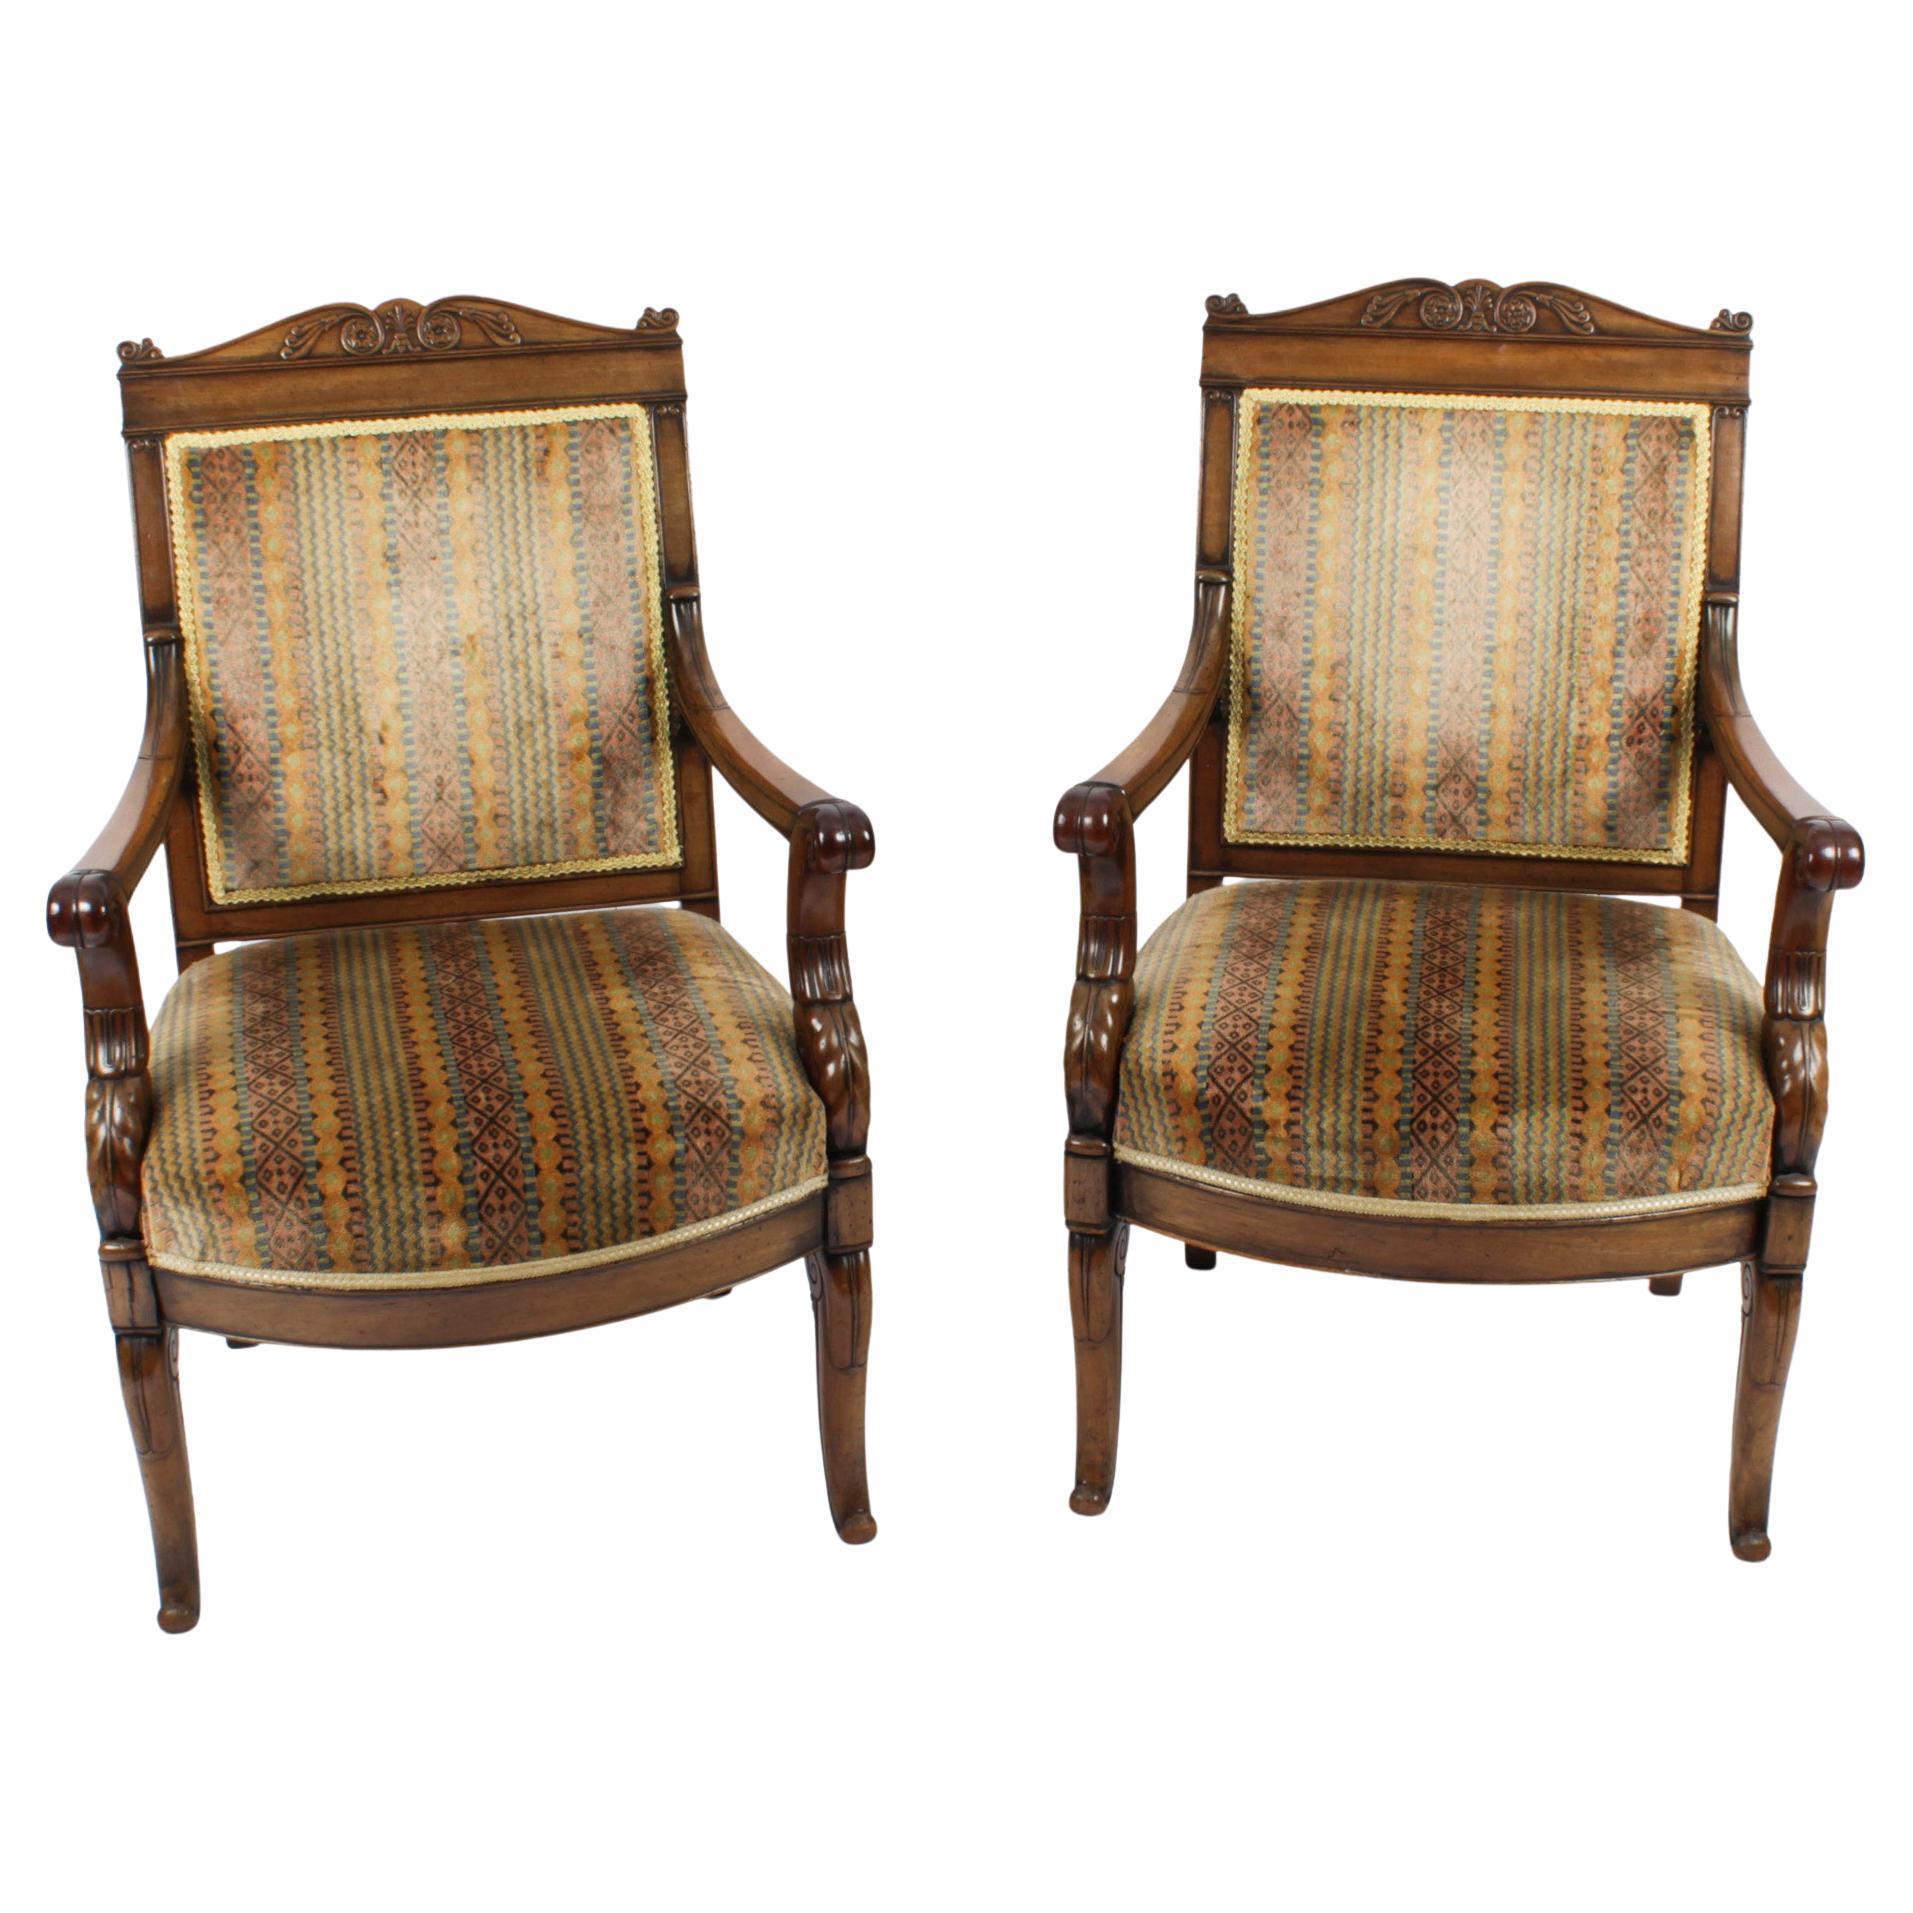 Antique Pair French Empire Armchair Fauteuils Chairs, 19th Century For Sale